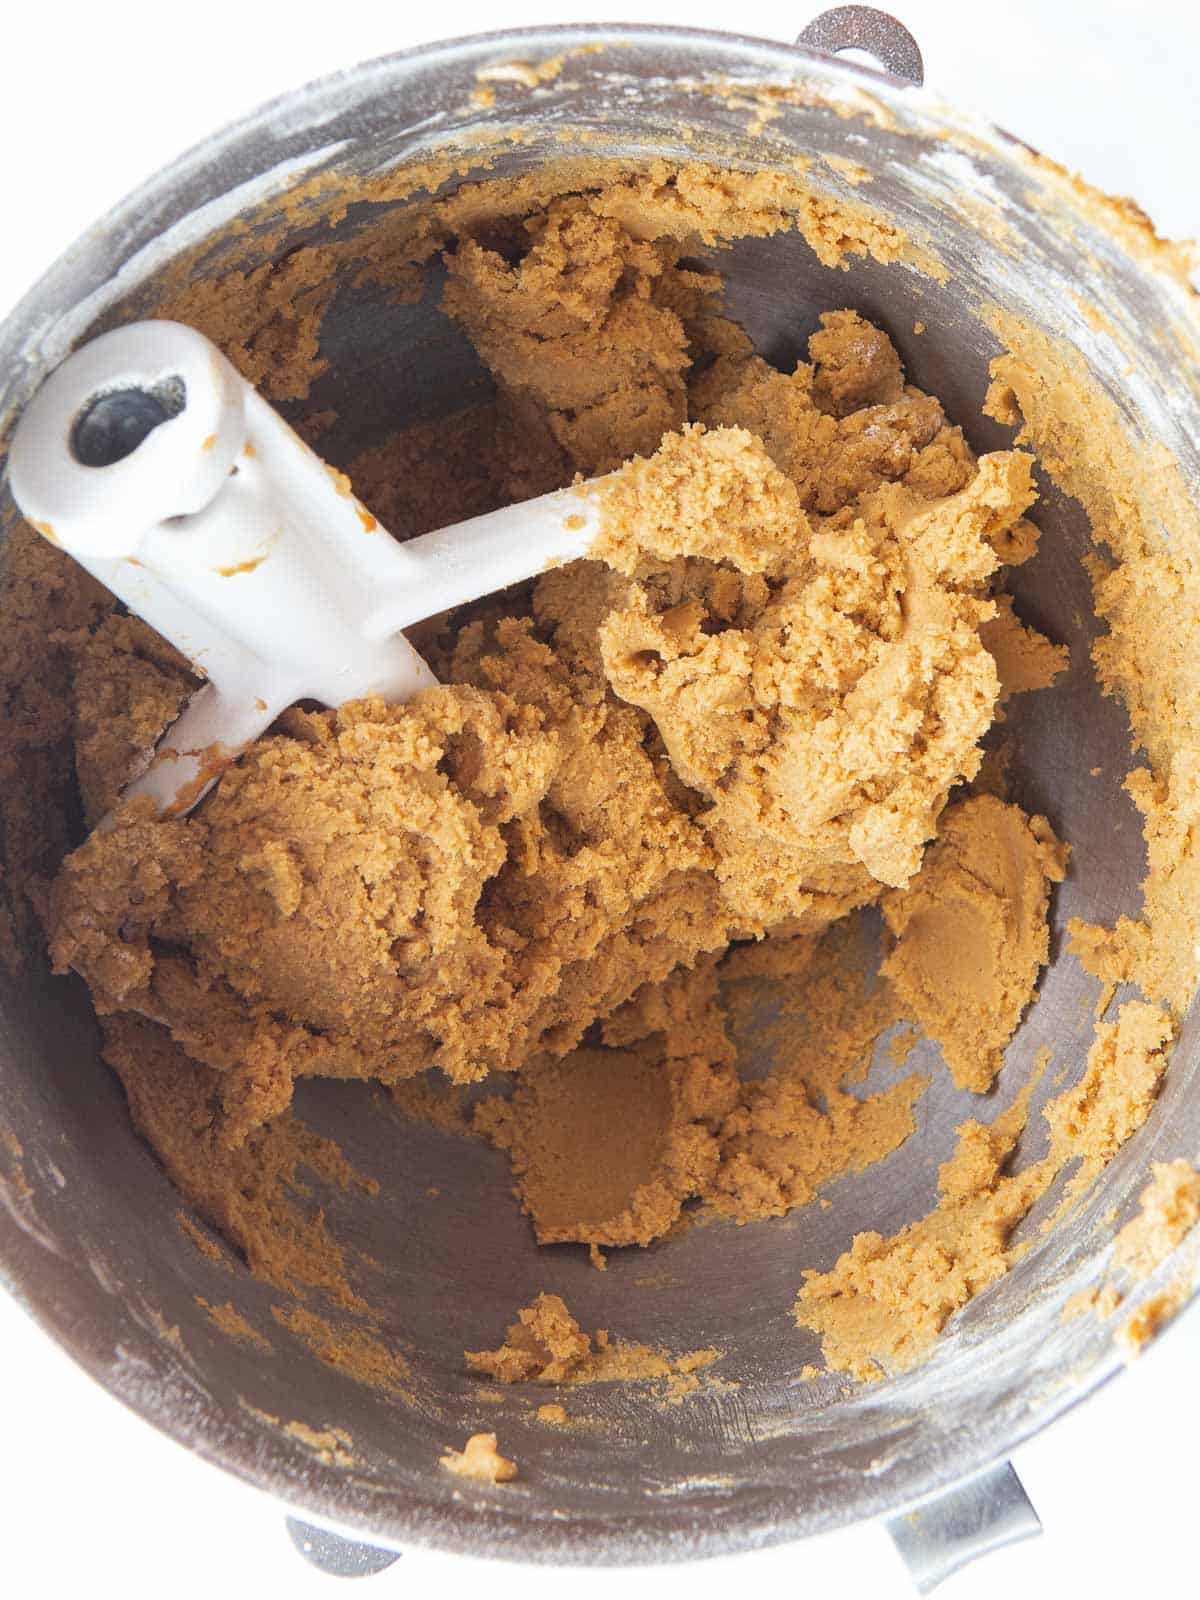 Gluten-free molasses cookie dough in a mixing bowl.